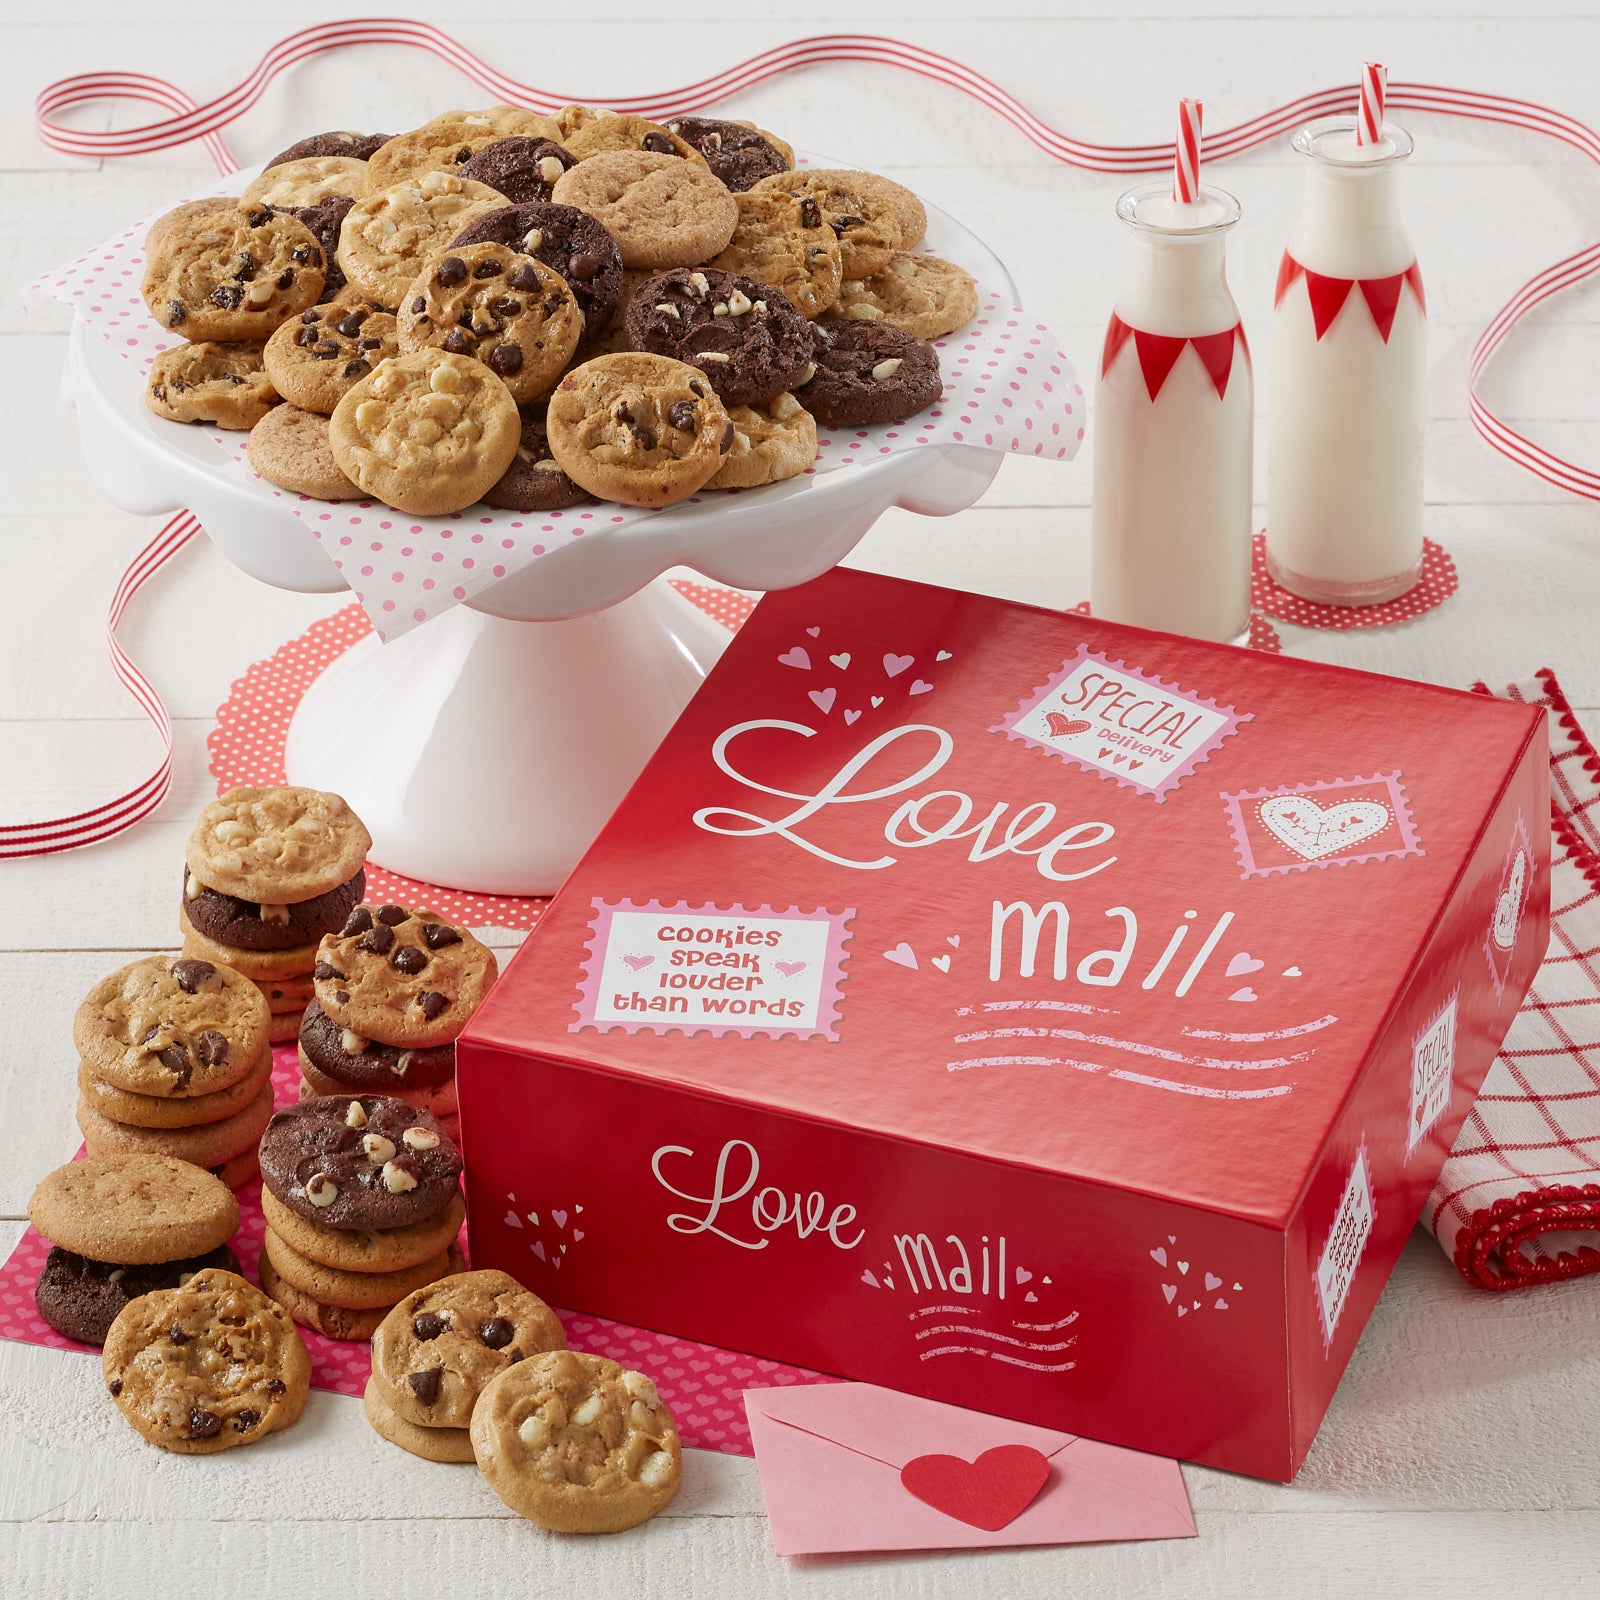 A red gift box decorated with valentines with the sentiment Love mail and surrounded with an assortment of Nibblers.